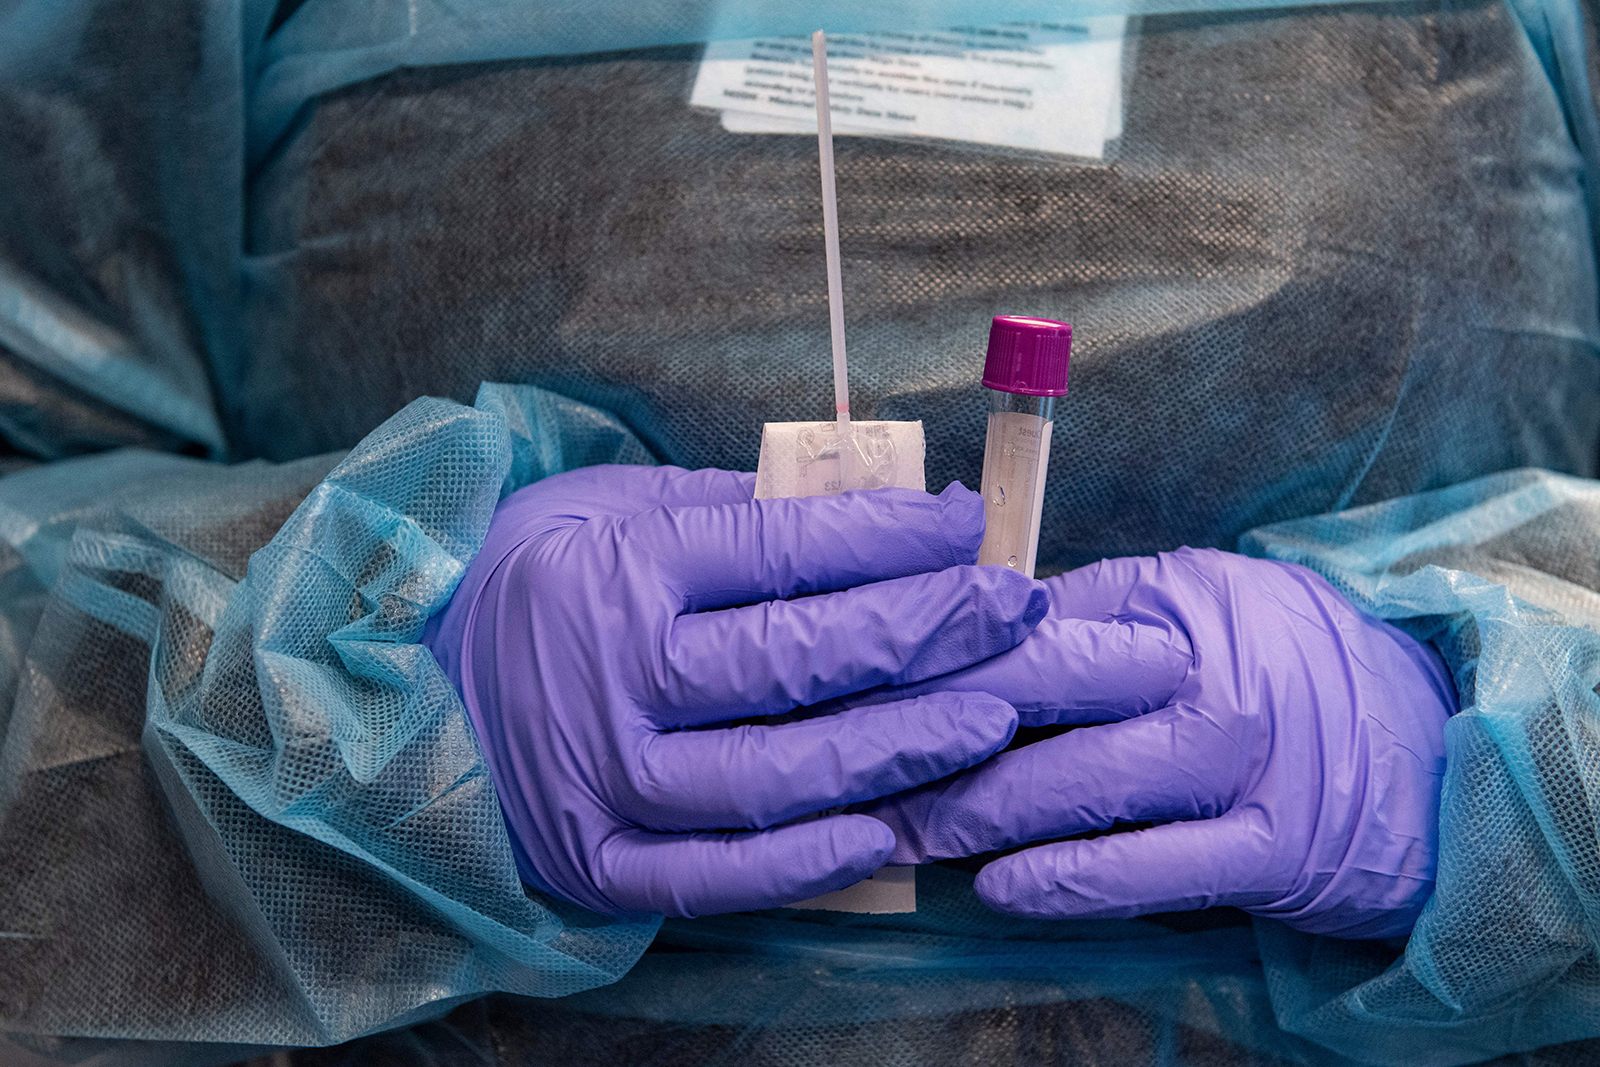 A medical worker prepares a Covid-19 PCR test at East Boston Neighborhood Health Center in Boston, Massachusetts on December 20.